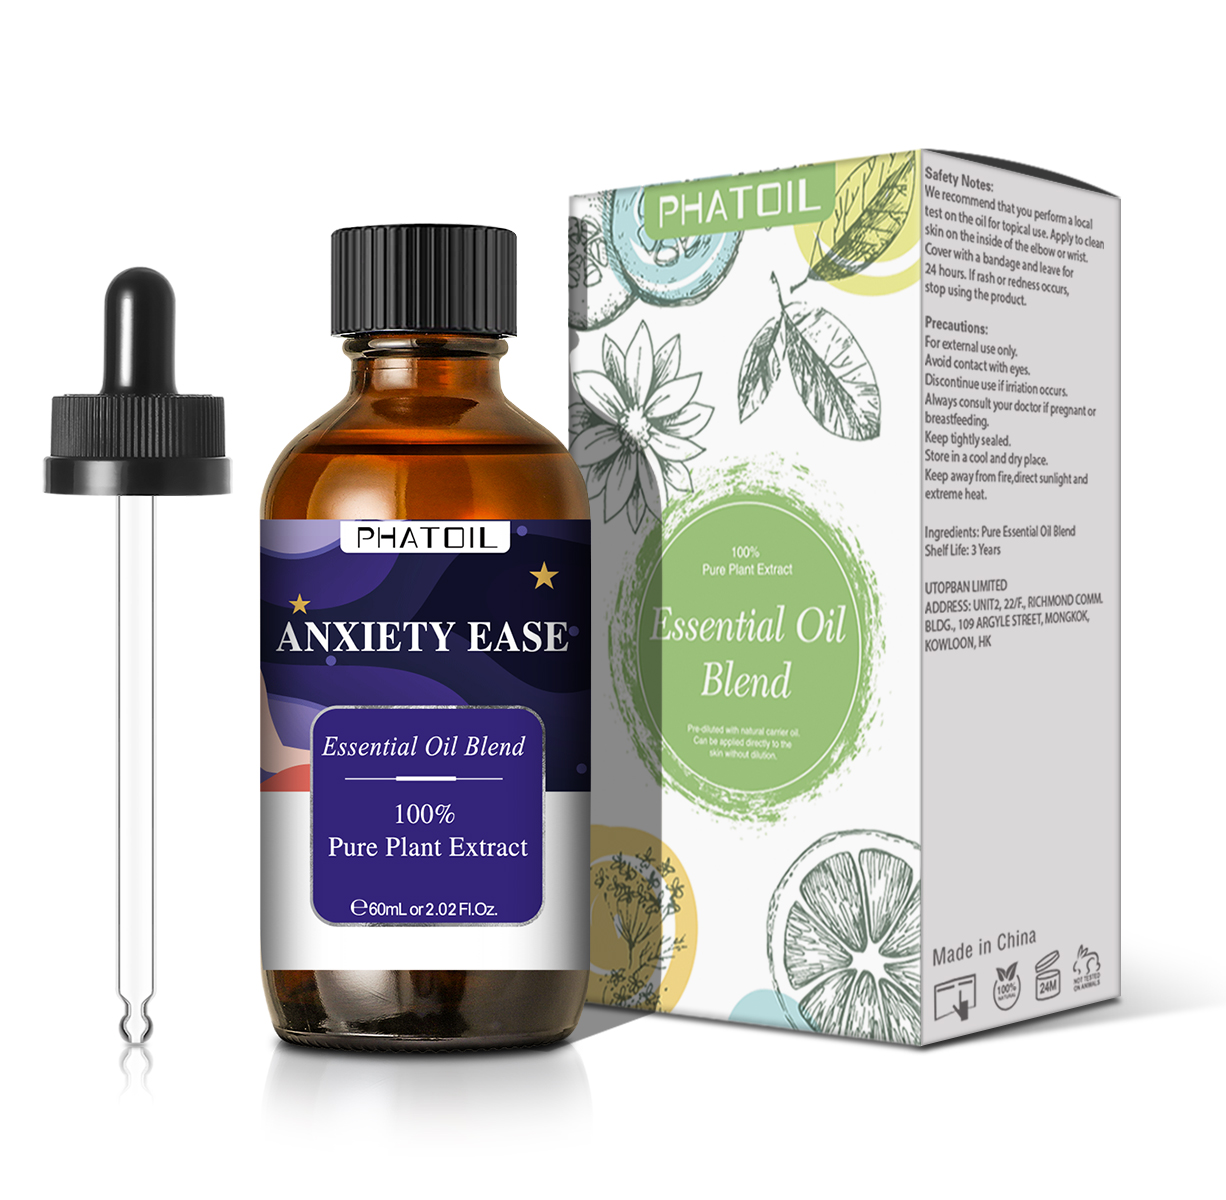 Anxiety Ease Essential Oil Blend